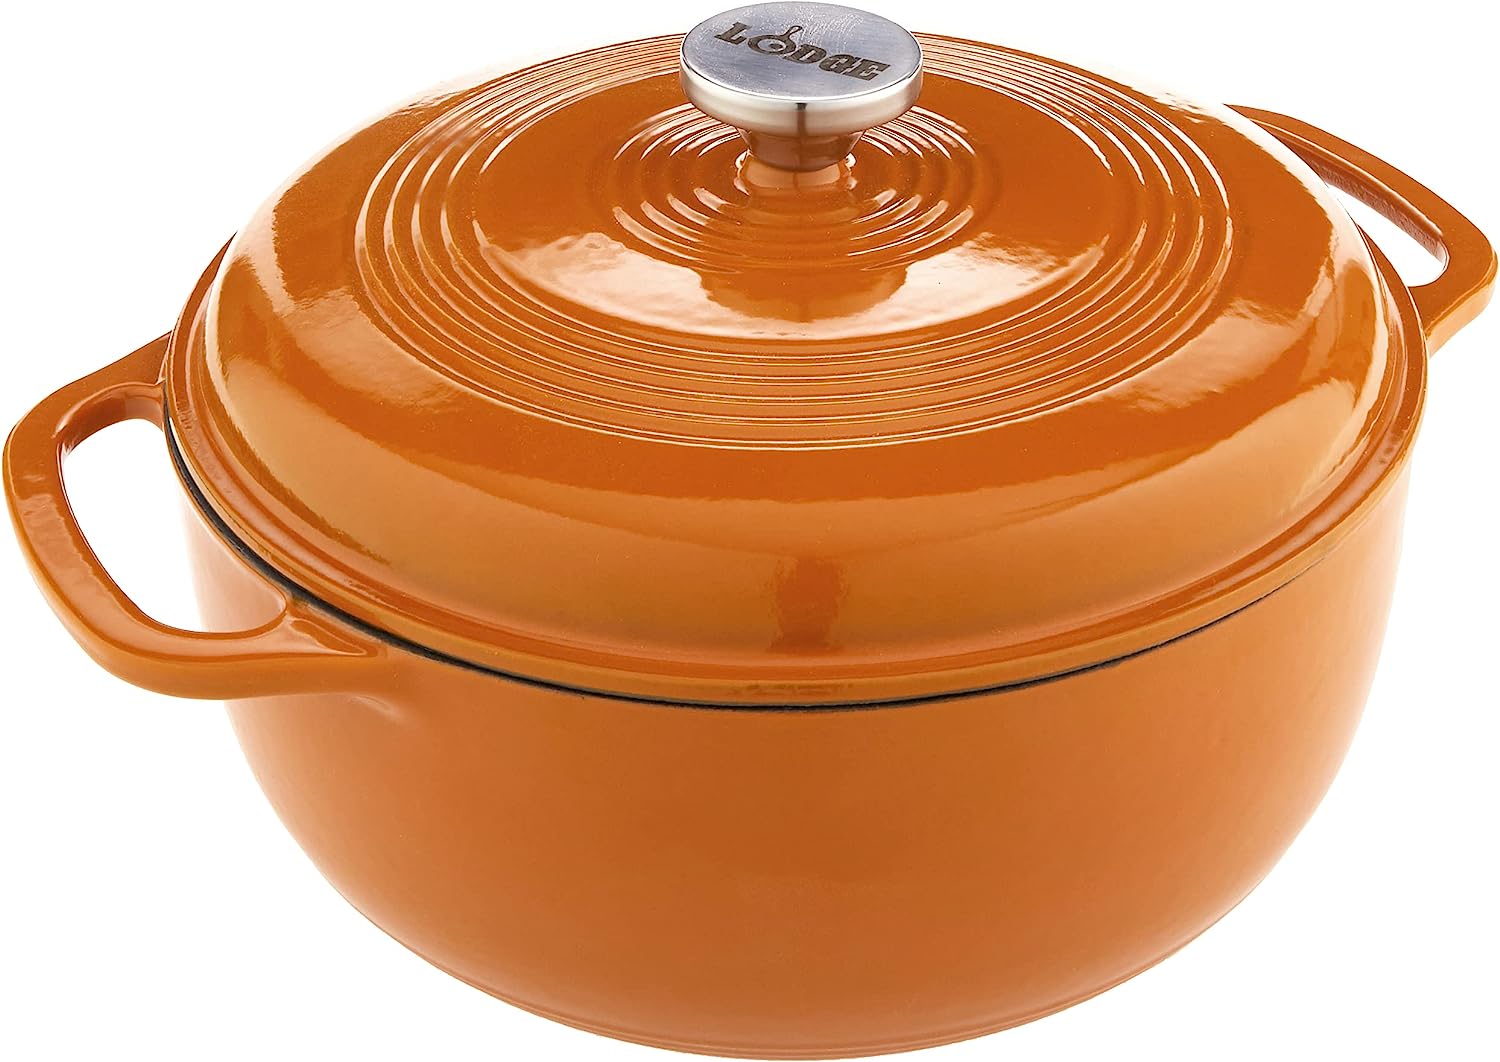 Lodge 6 Quart Enameled Cast Iron Dutch Oven with Lid – Dual Handles – Oven  Safe up to 500° F or on Stovetop - Use to Marinate, Cook, Bake, Refrigerate  and Serve – Blue